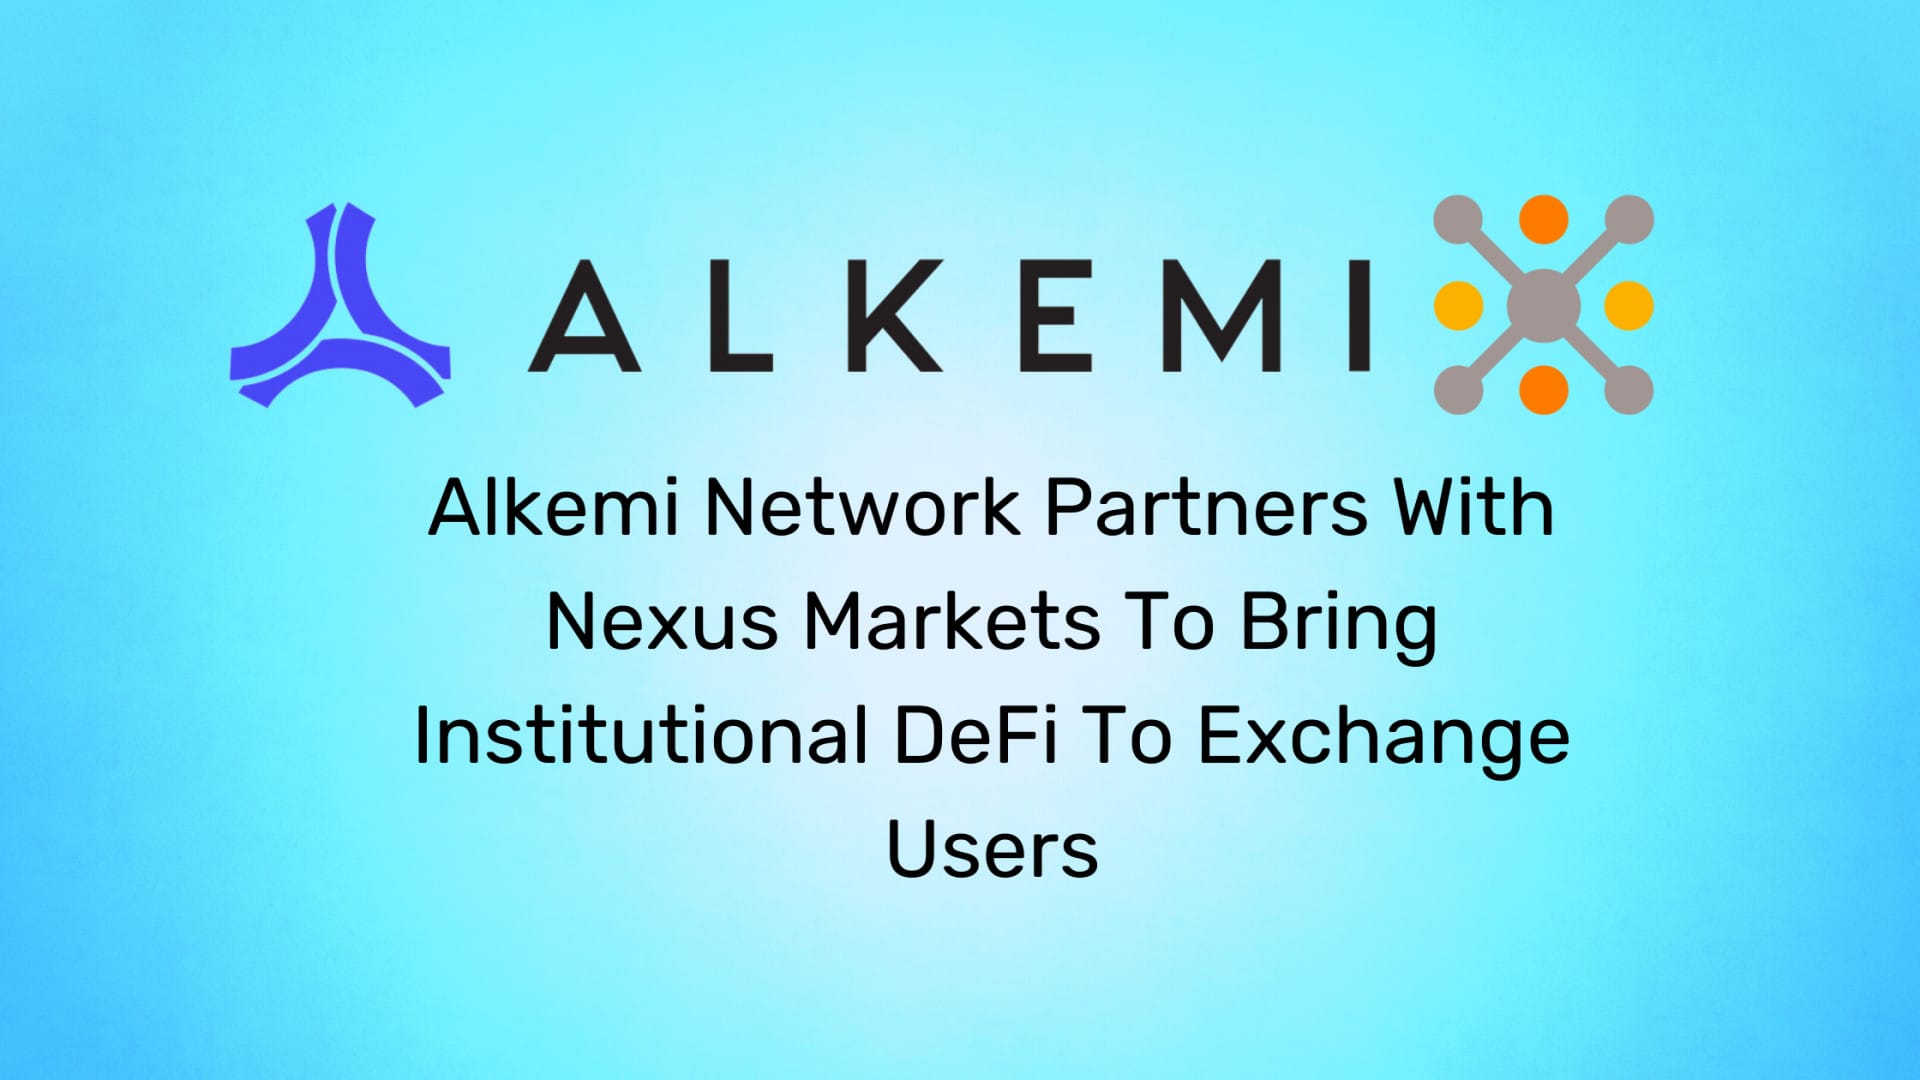 Alkemi Network Partners With Nexus Markets To Bring Institutional DeFi To Exchange Users